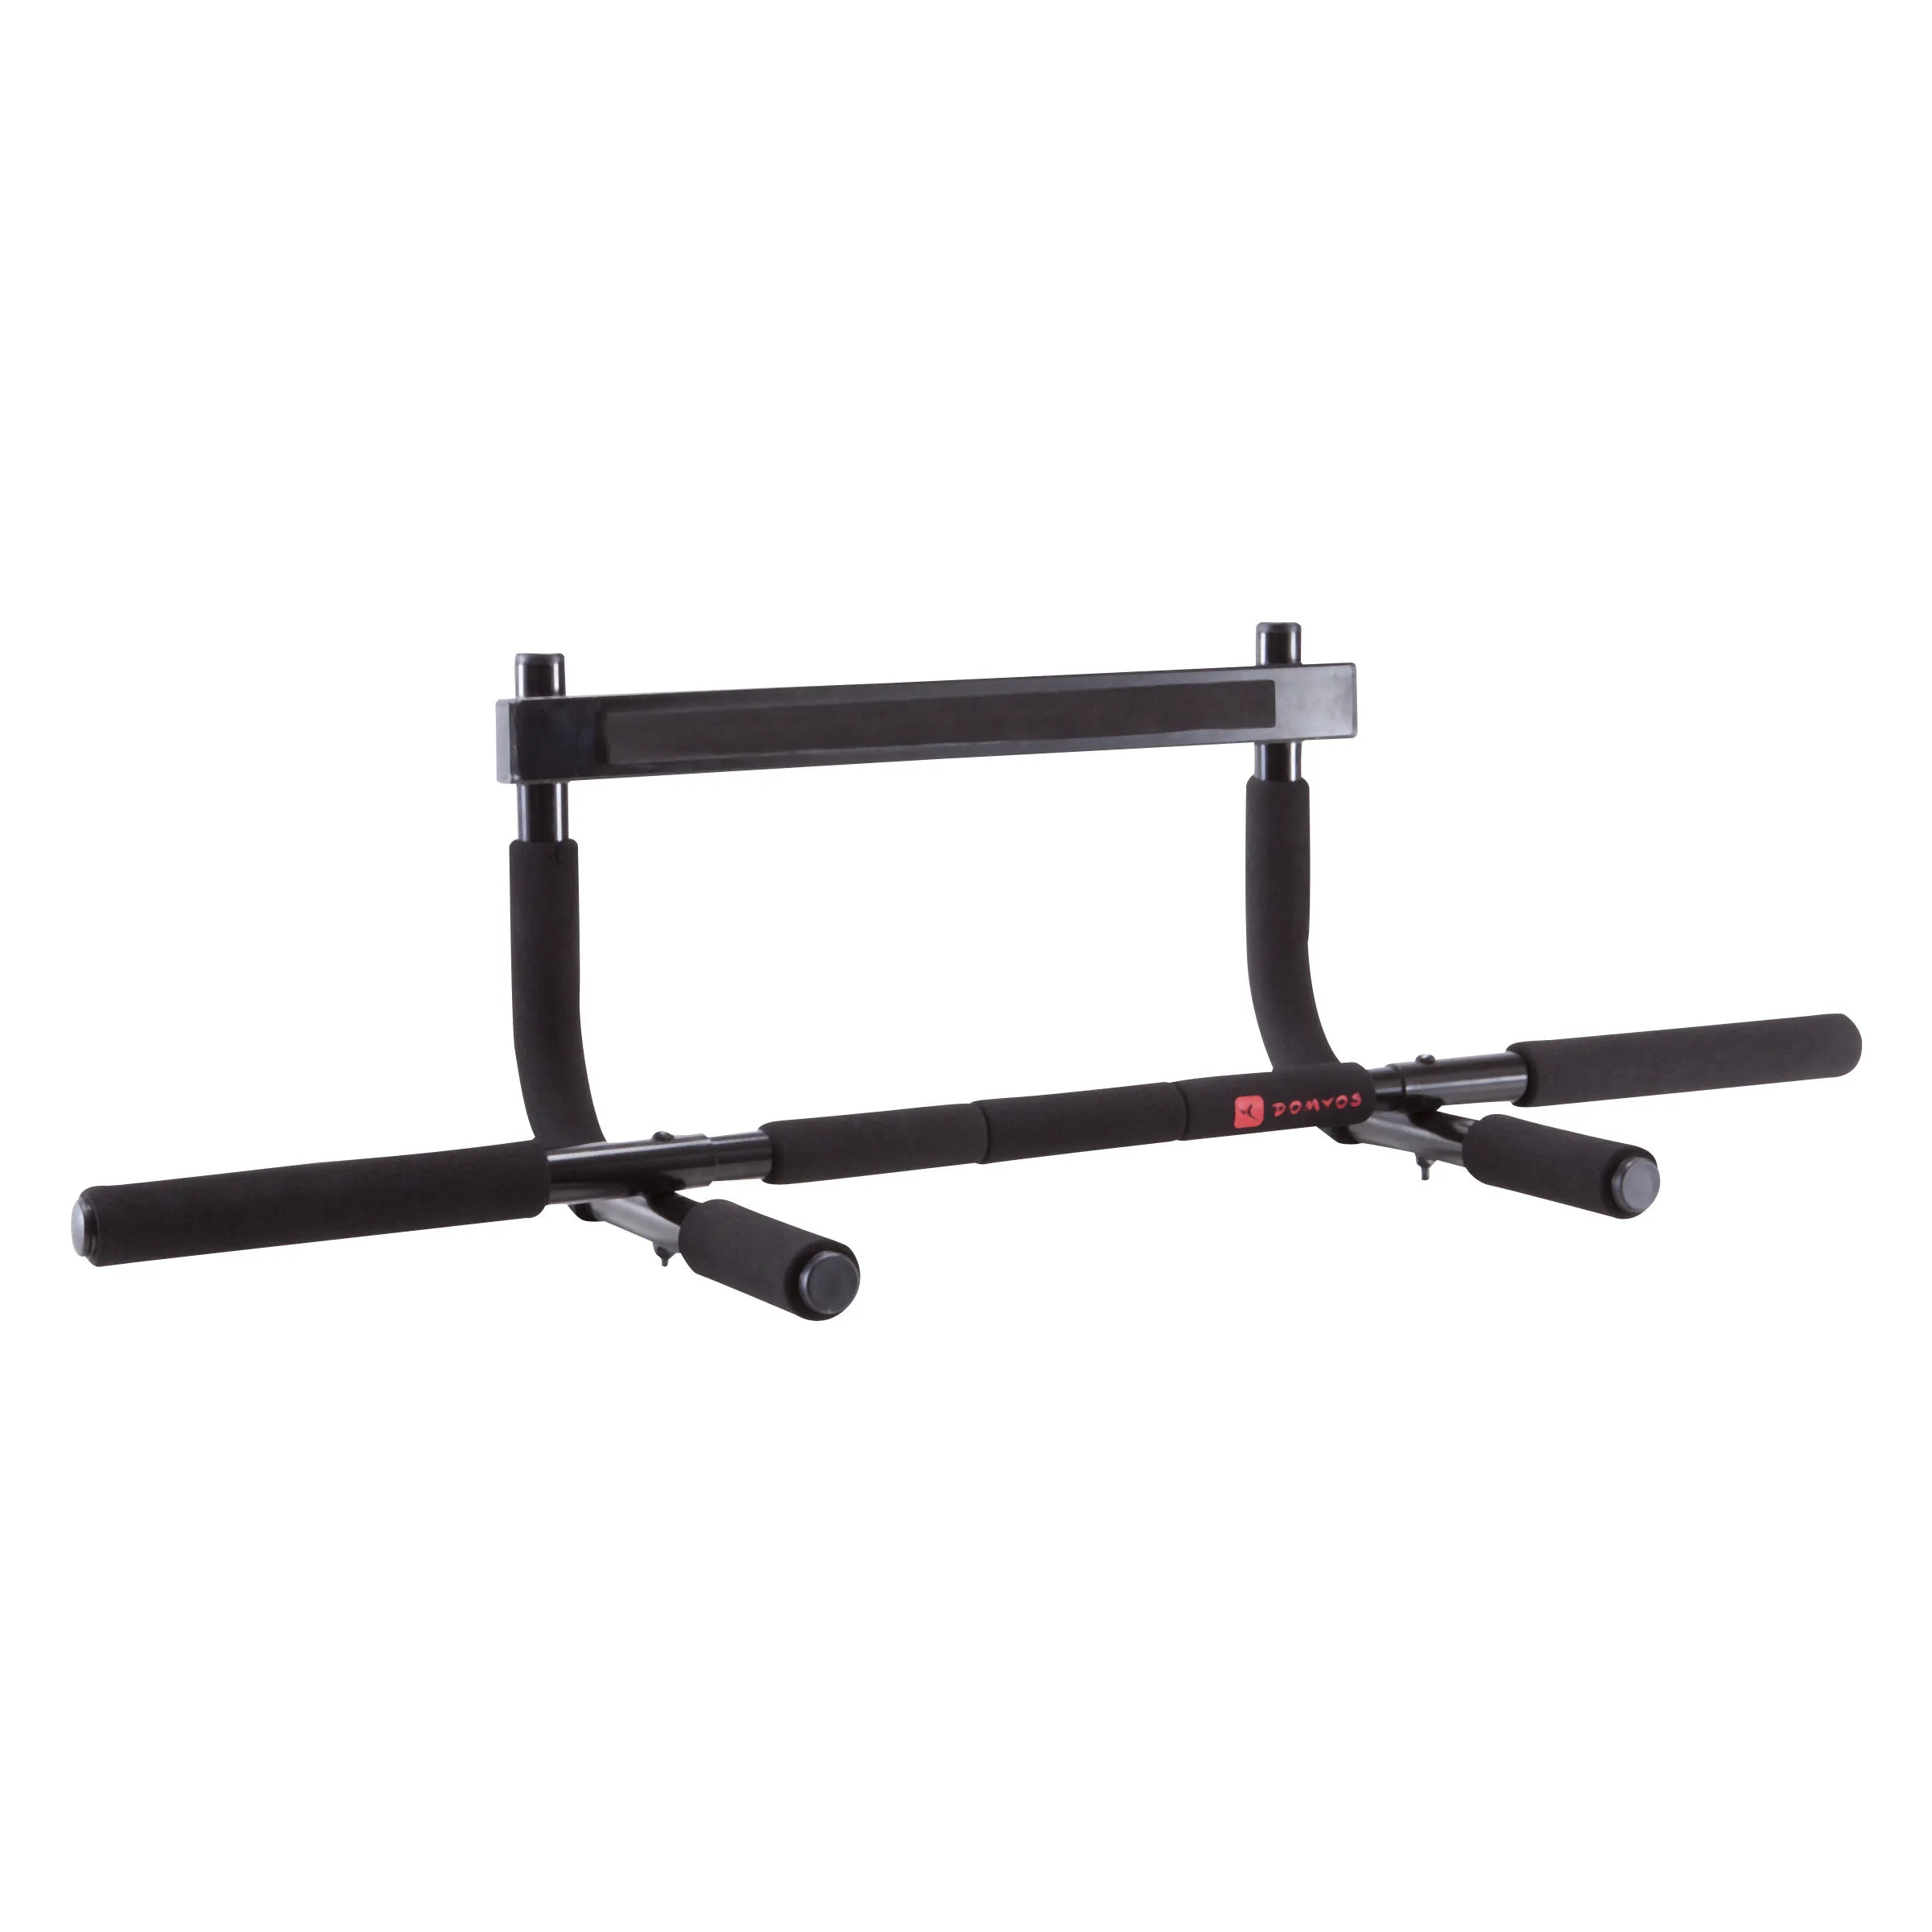 Pull Up Bar for your compact storage space.